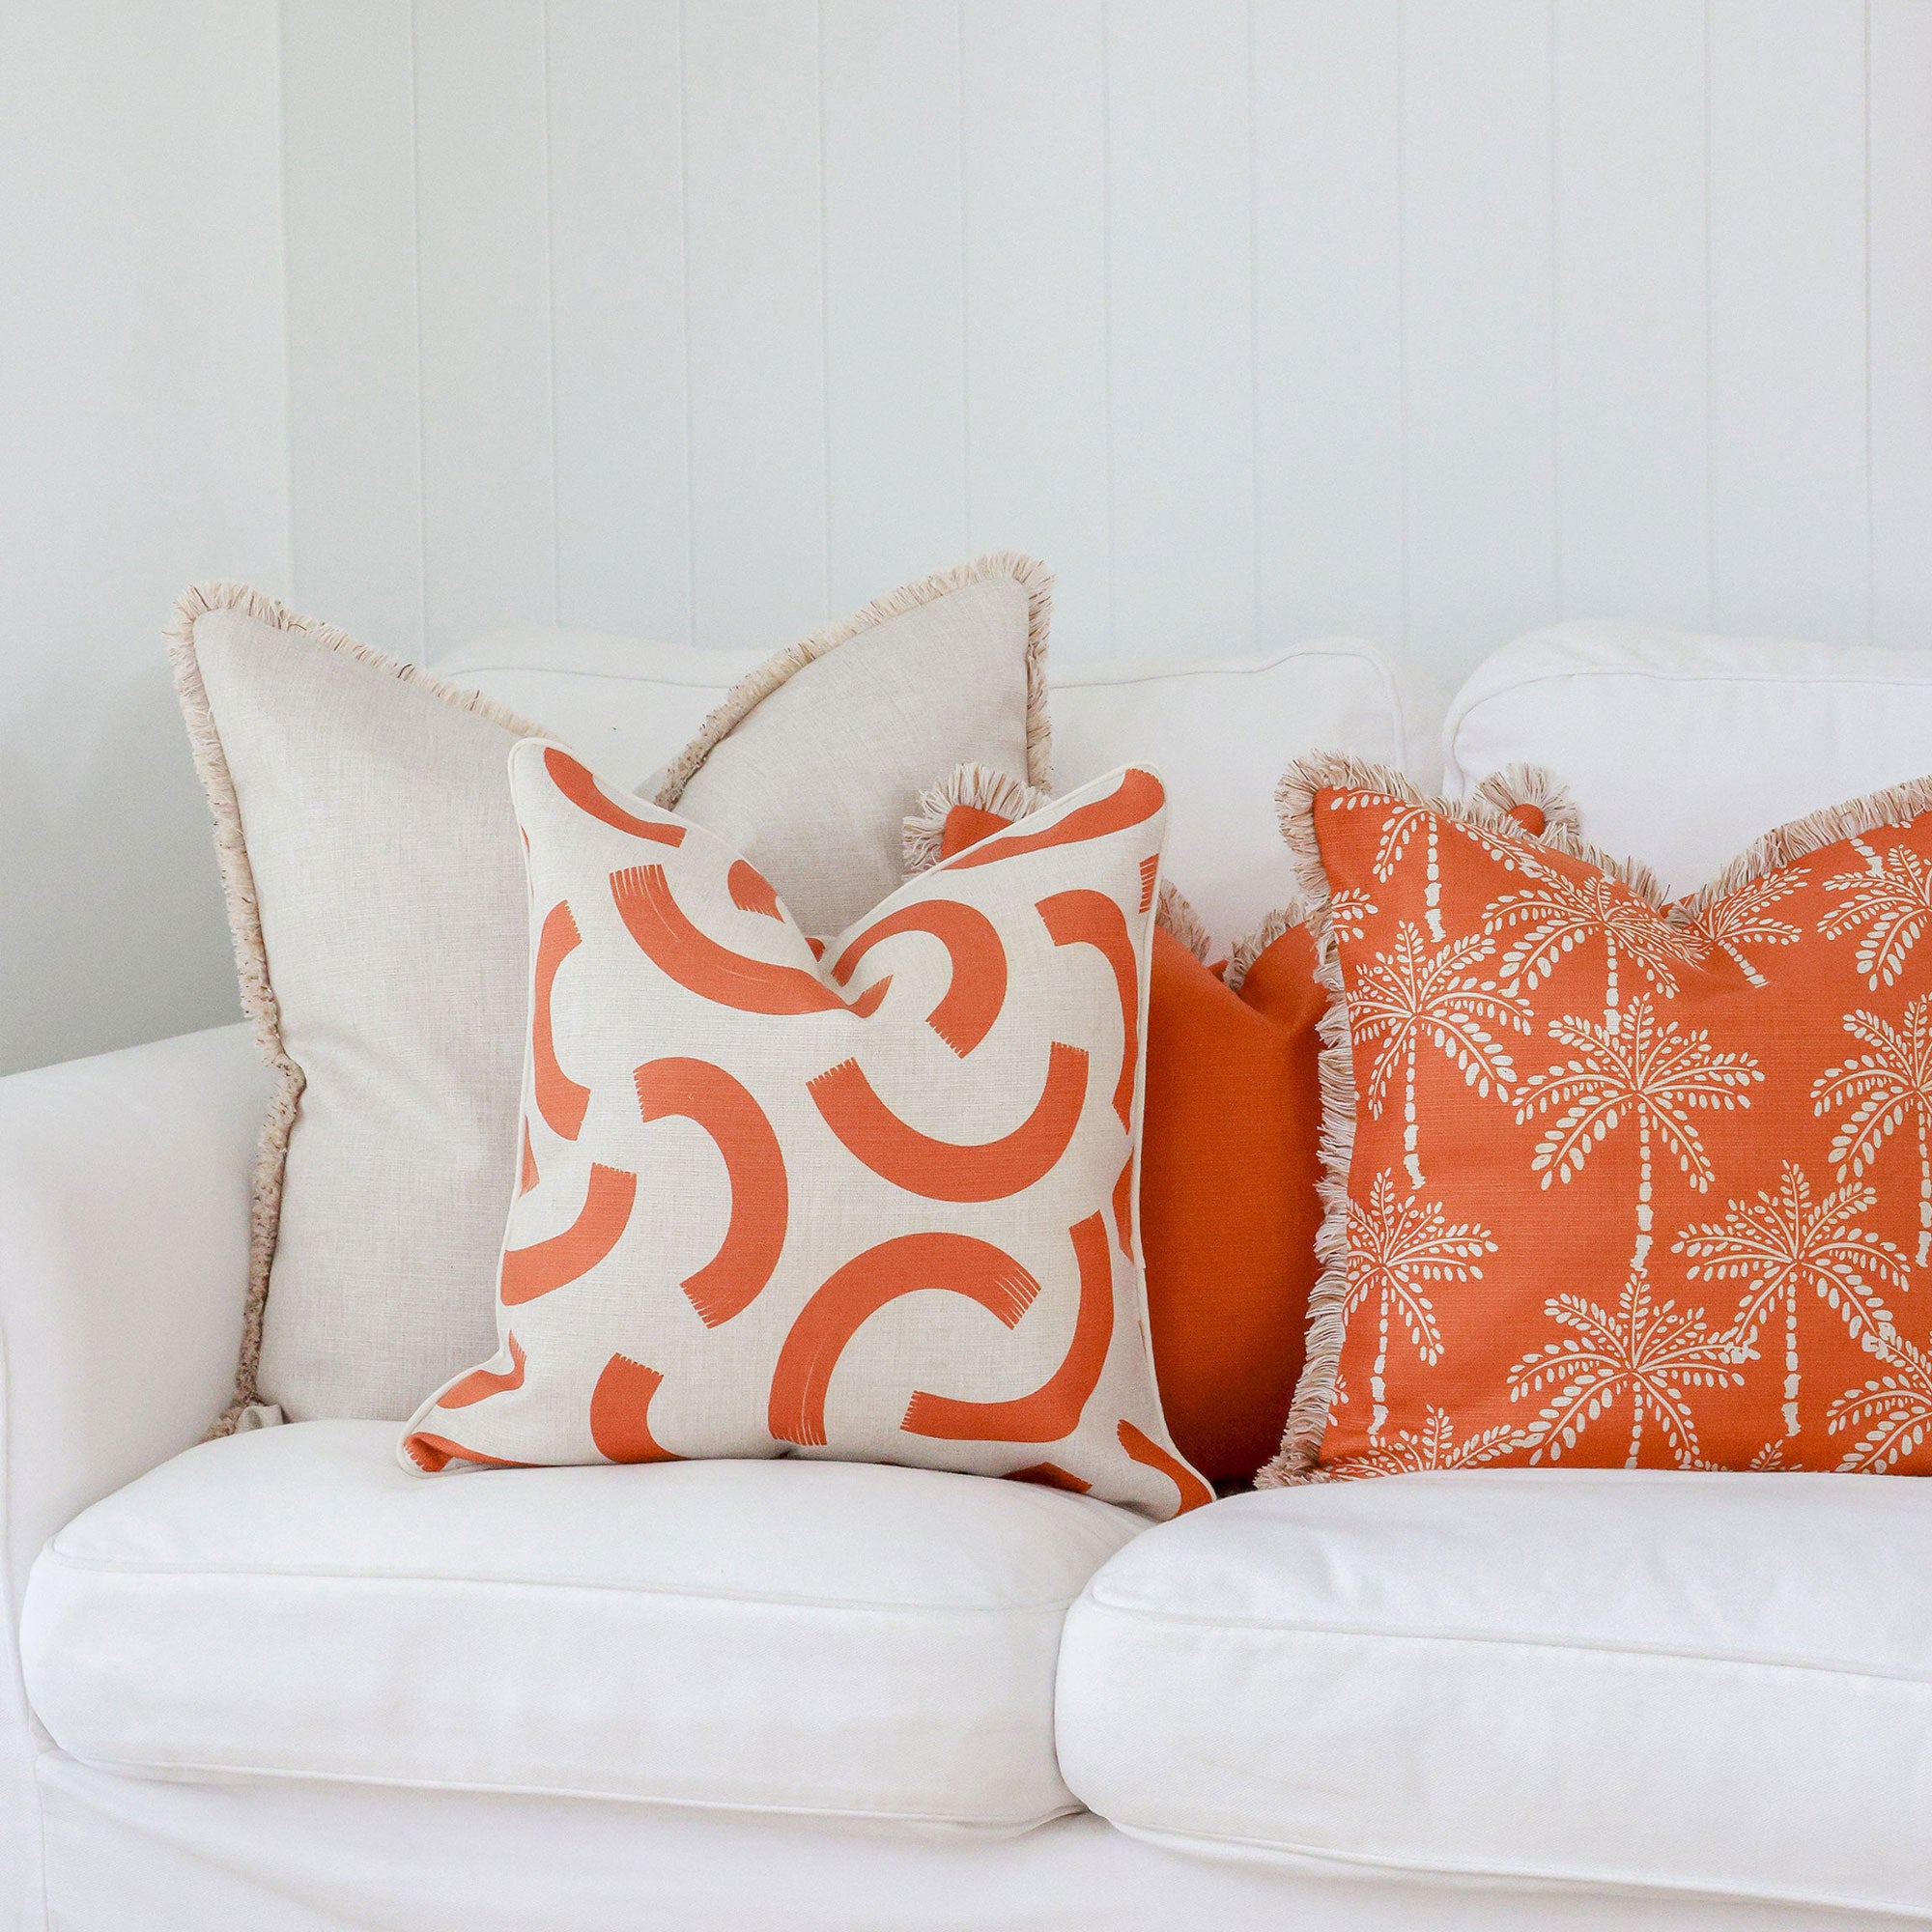 Cushion Cover-With Piping-Muse Burnt Orange-45cm x 45cm